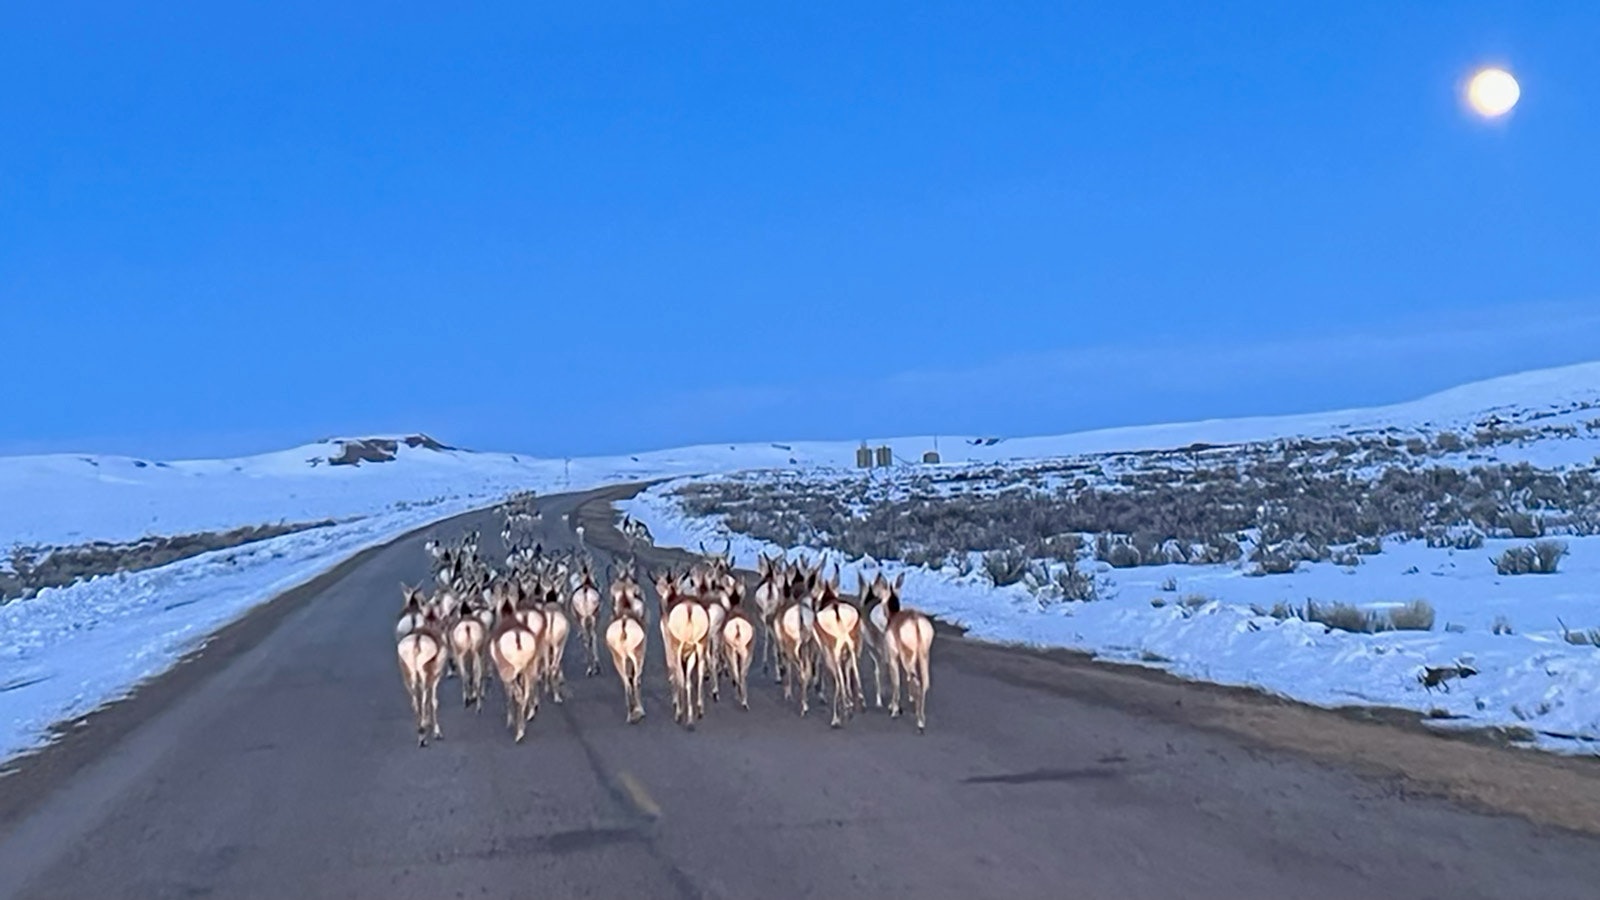 Antelope near Big Piney have resorted to traveling on highways because much of the countryside remains locked under deep snow.